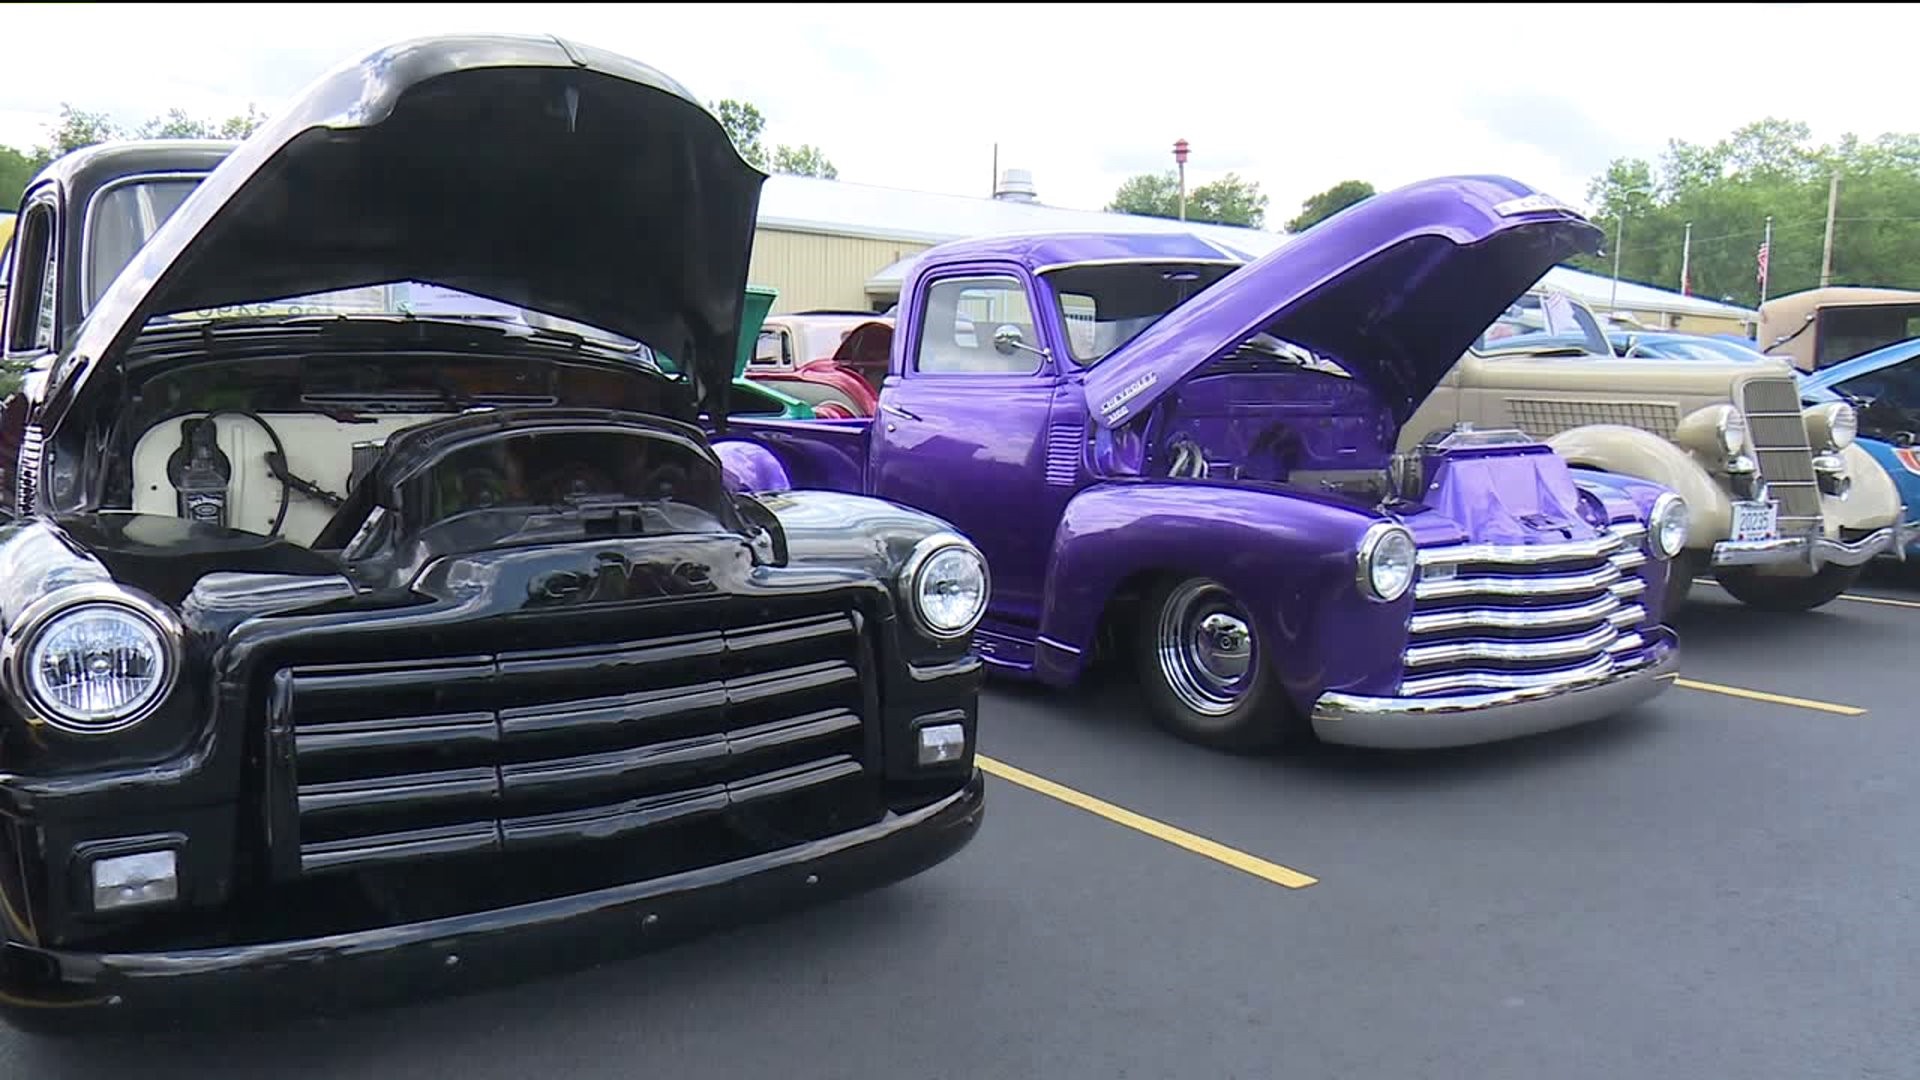 Classic Cars on Display in Old Forge